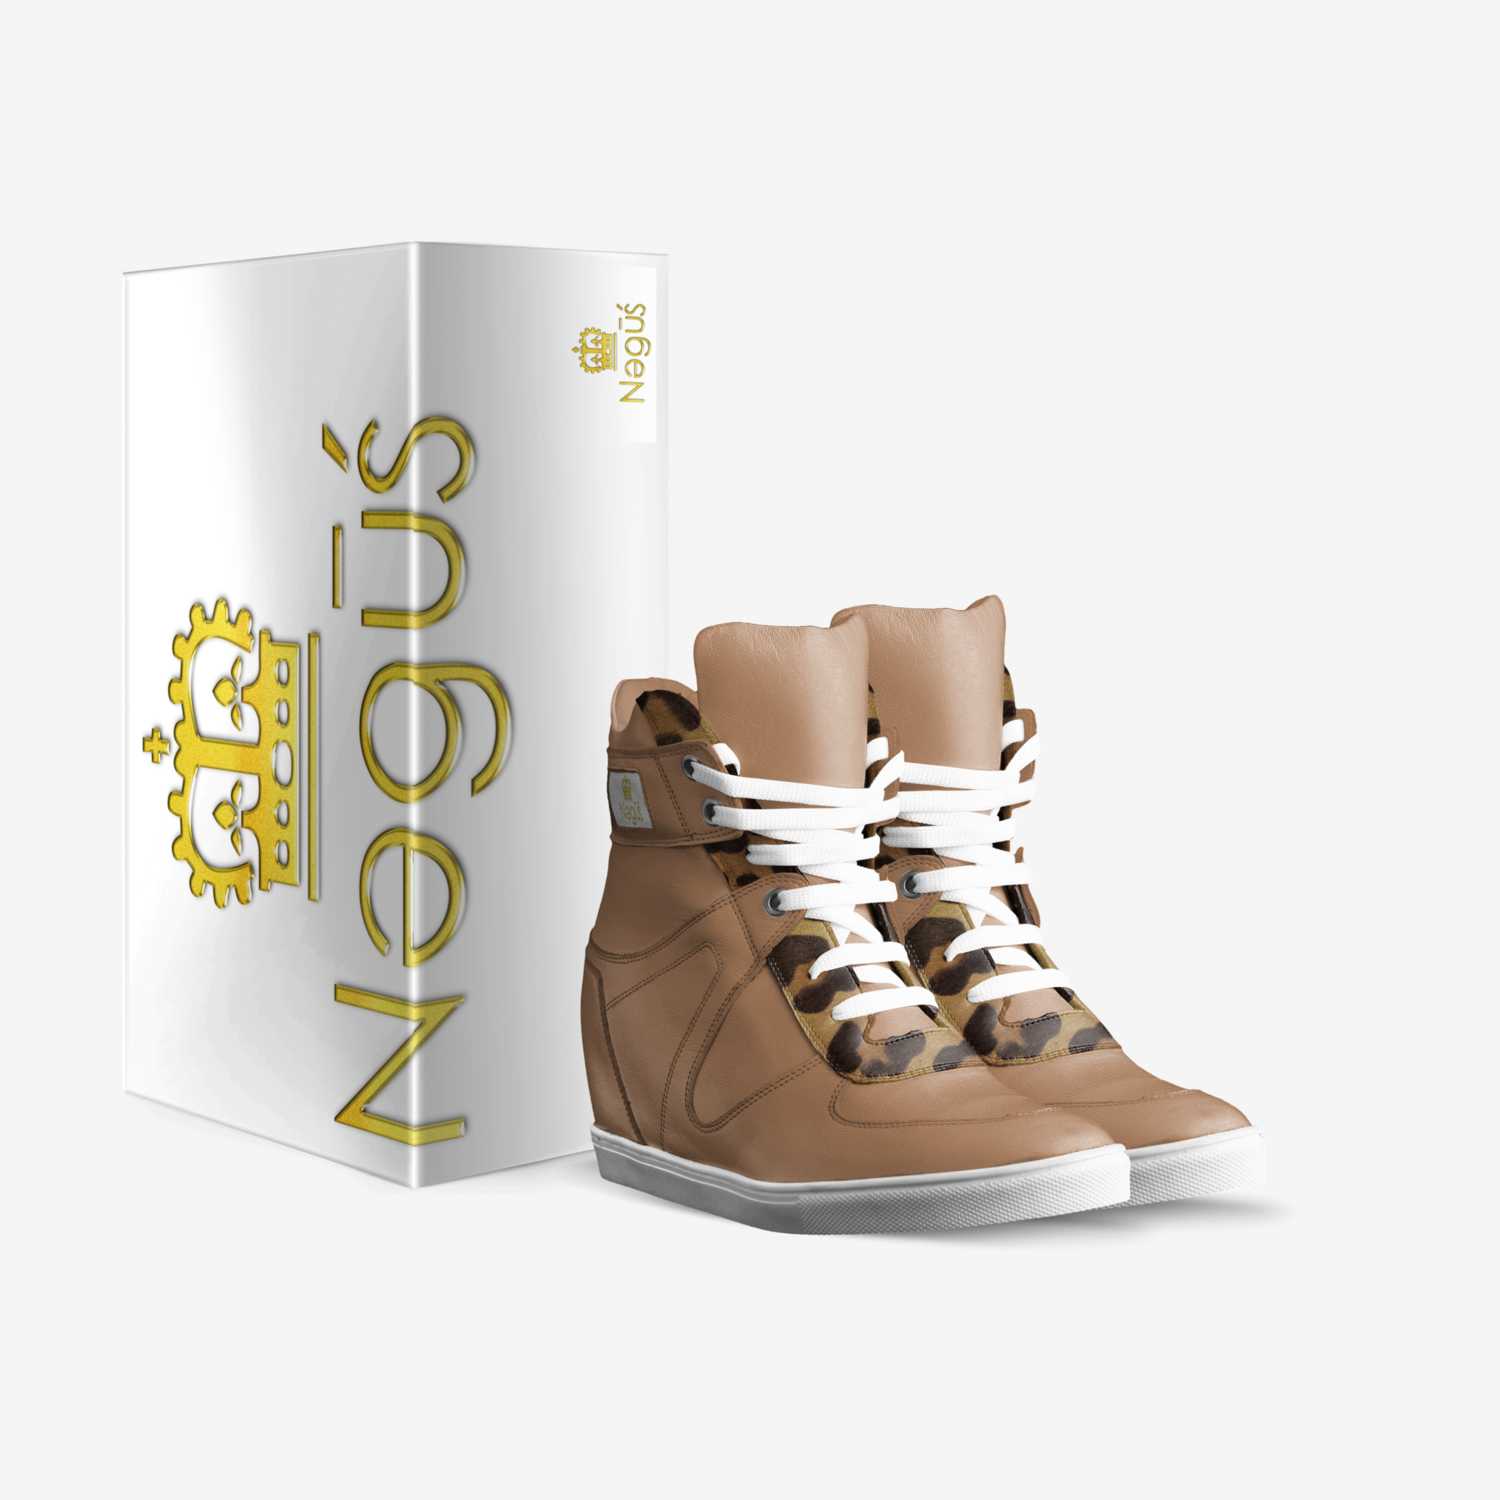 NUGUS custom made in Italy shoes by Negus Mills | Box view